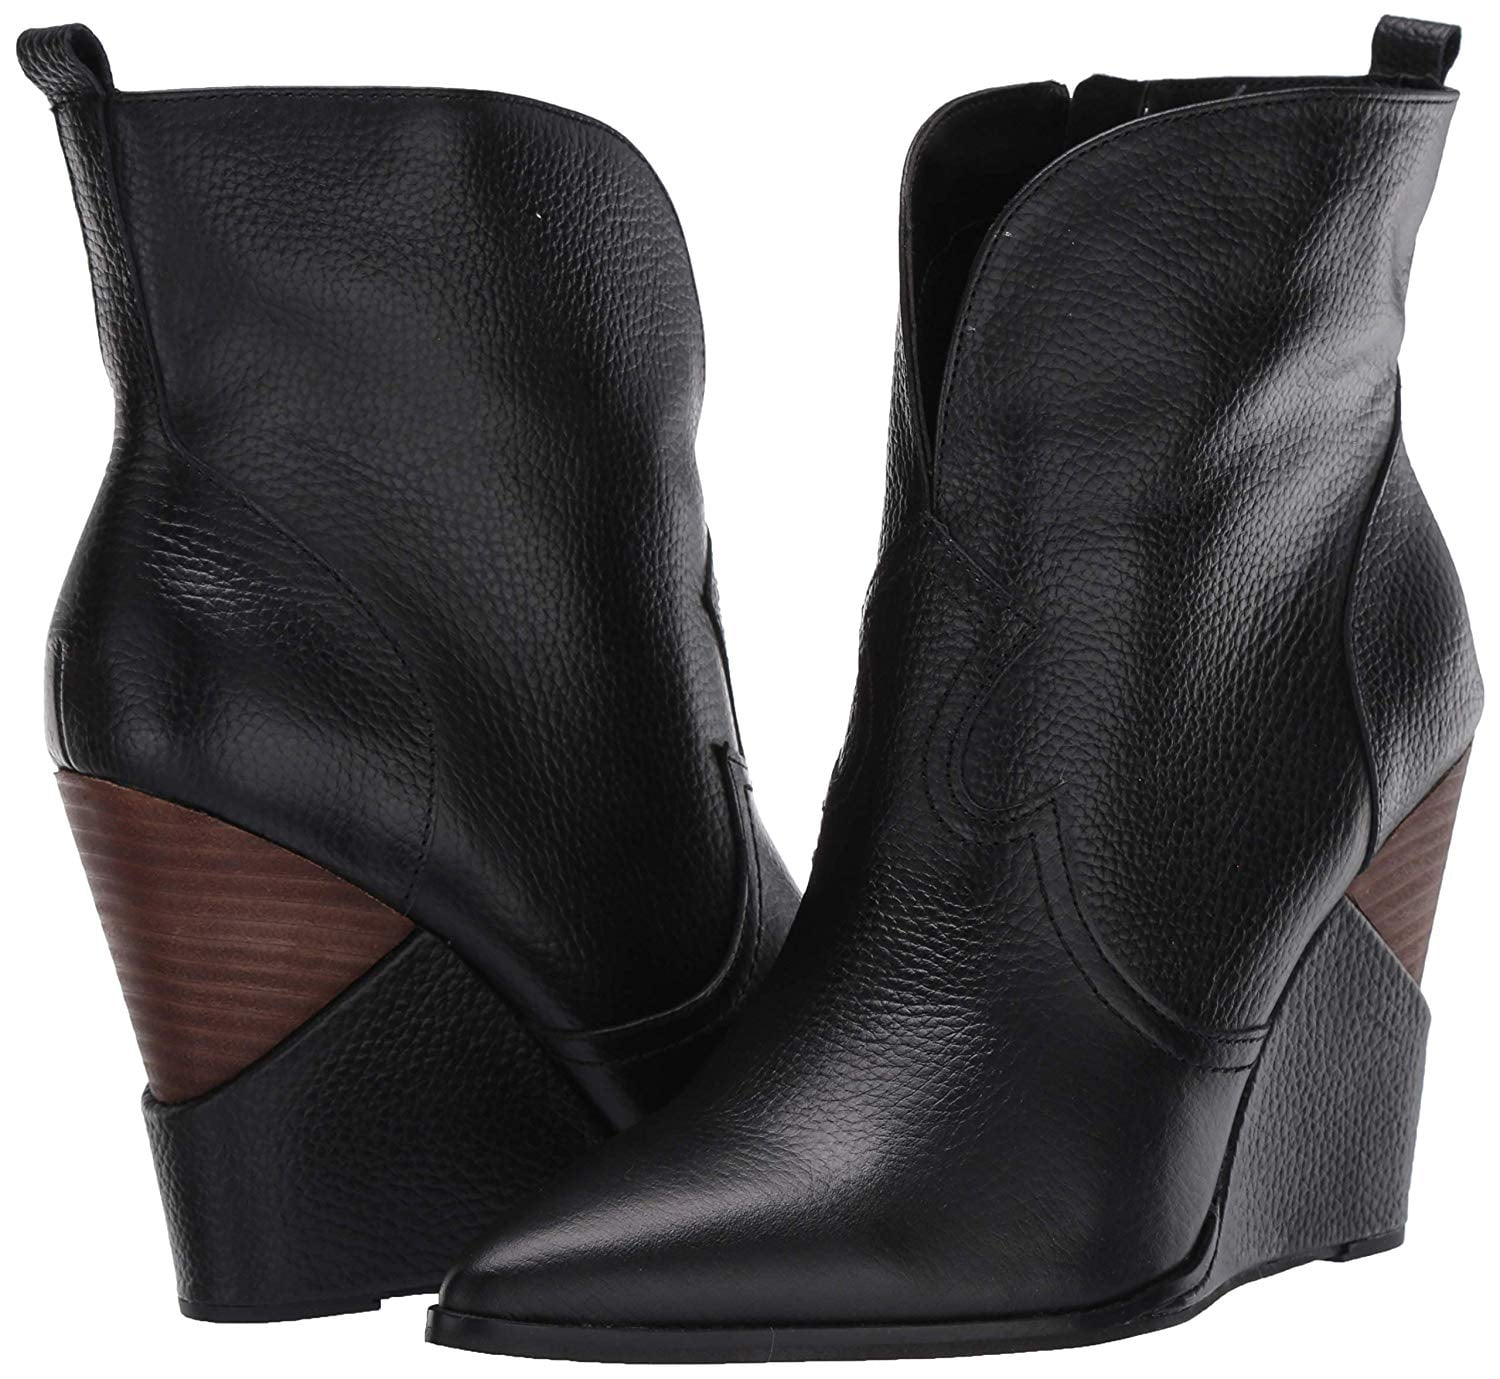 jessica simpson hilrie boots